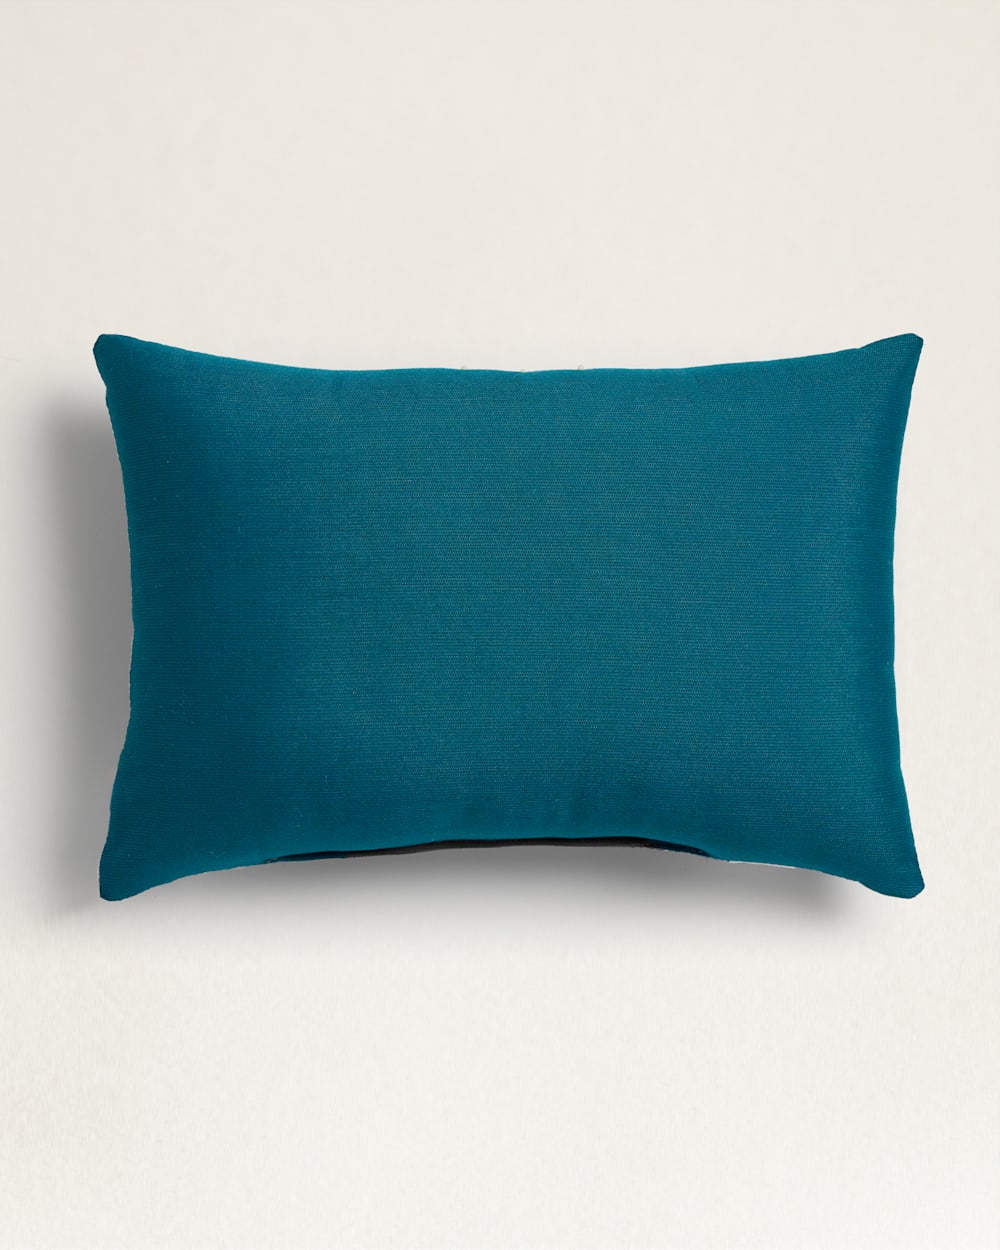 ALTERNATE VIEW OF SUNBRELLA X PENDLETON LUMBAR OUTDOOR PILLOW IN MOJAVE/TURQUOISE image number 2